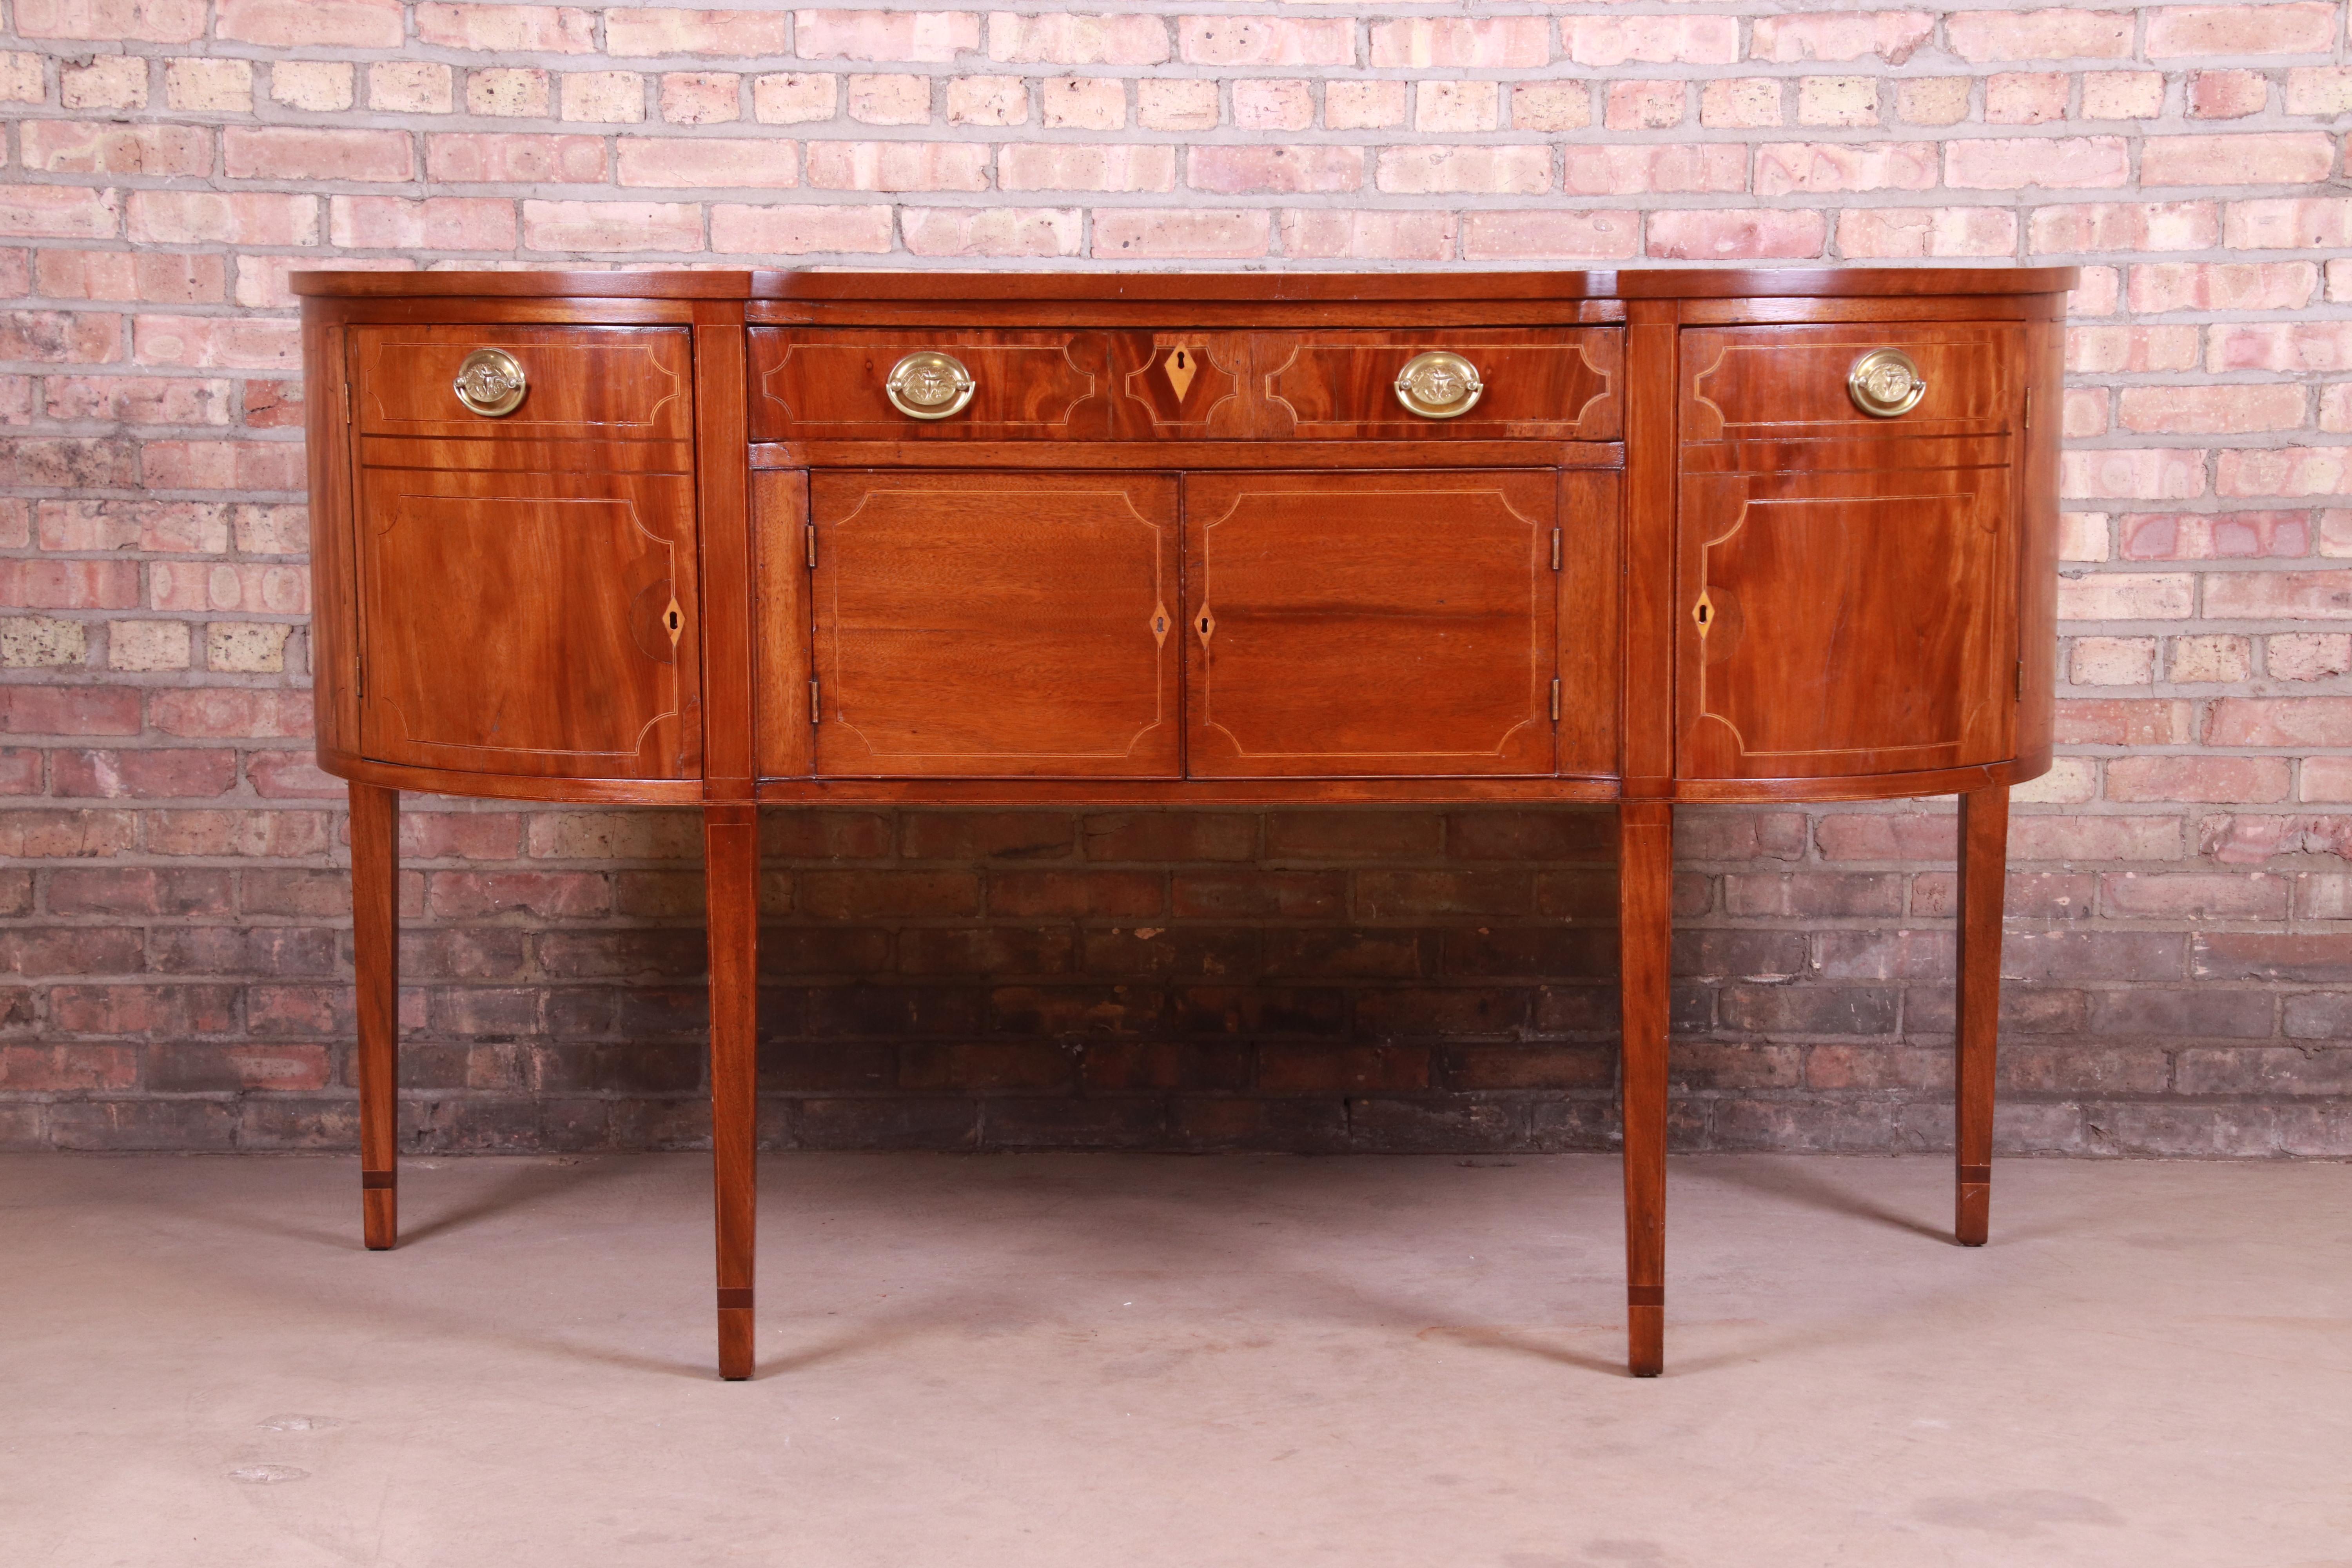 A gorgeous antique Hepplewhite demilune sideboard or credenza,

circa 1800

Mahogany, with satinwood inlay and original brass hardware.

Measures: 68.38